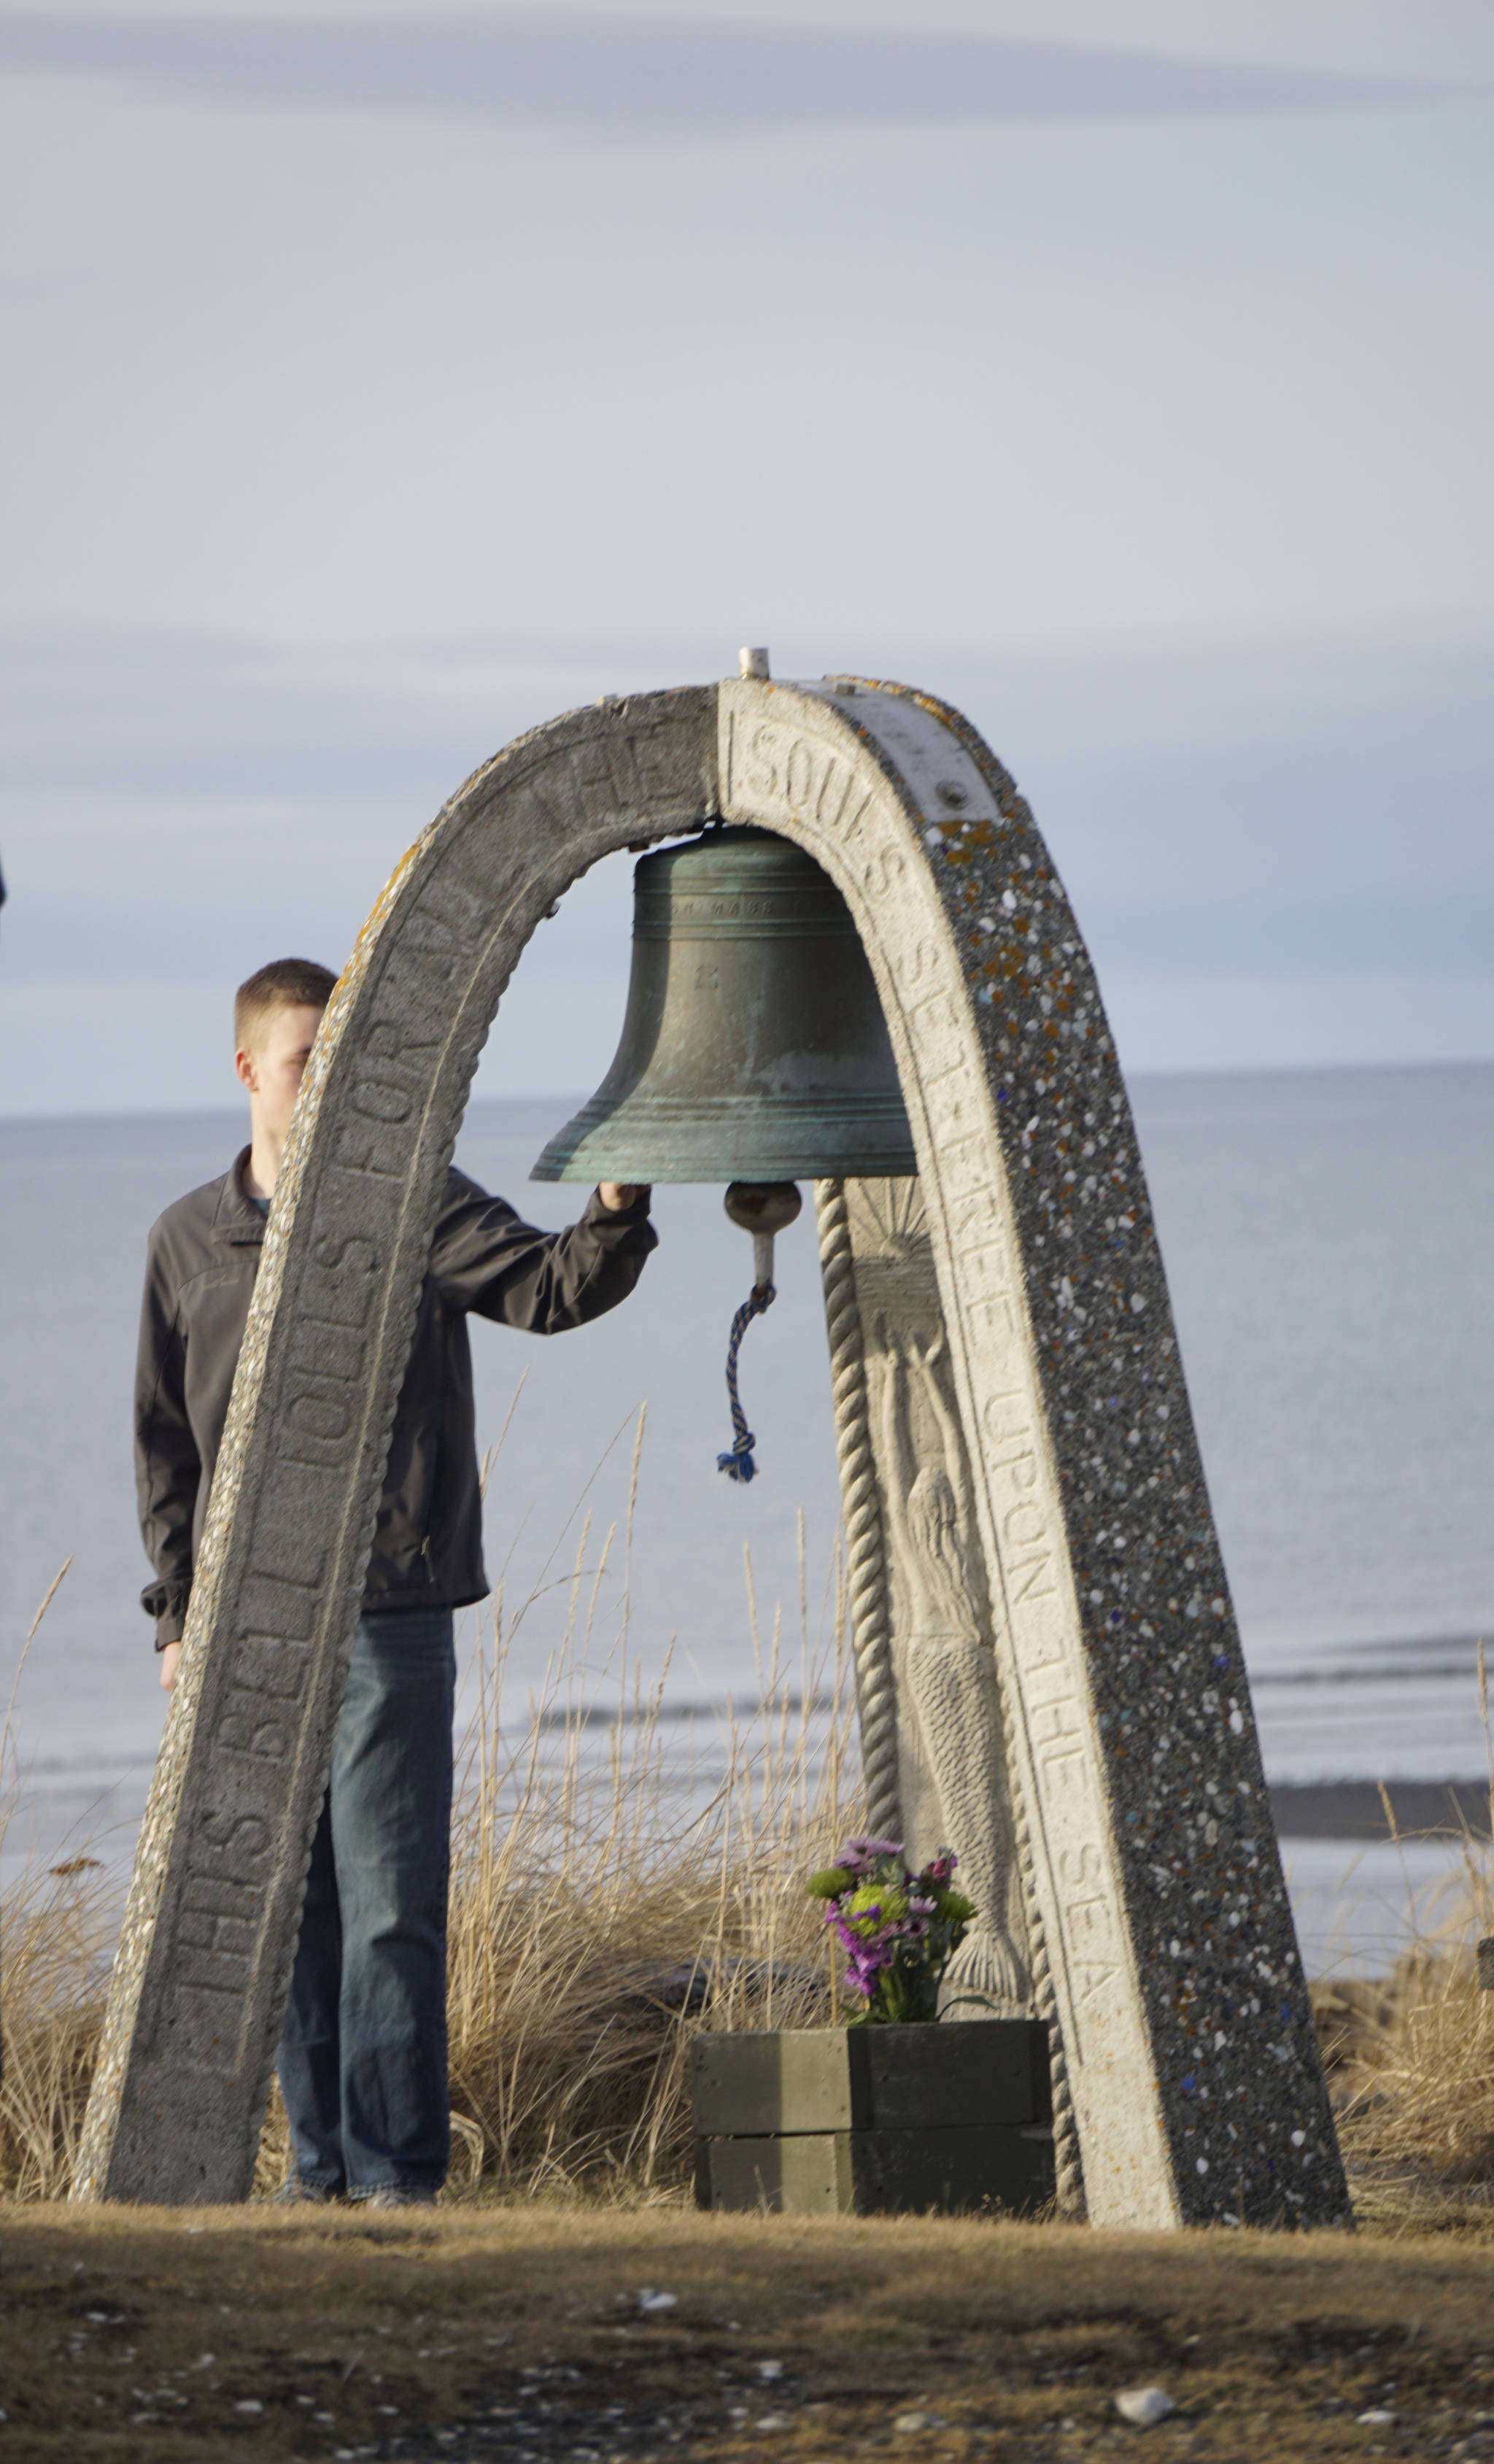 Seaman James Cloutier of the U.S. Coast Guard Cutter Hickory rings the end-of-watch bell for Chief Warrant Officer Michael Kozloski at a memorial service for him on Friday morning, Feb. 8, 2019, at the Seafarer’s Memorial on the Homer Spit, Homer, Alaska. (Photo by Michael Armstrong/Homer News)